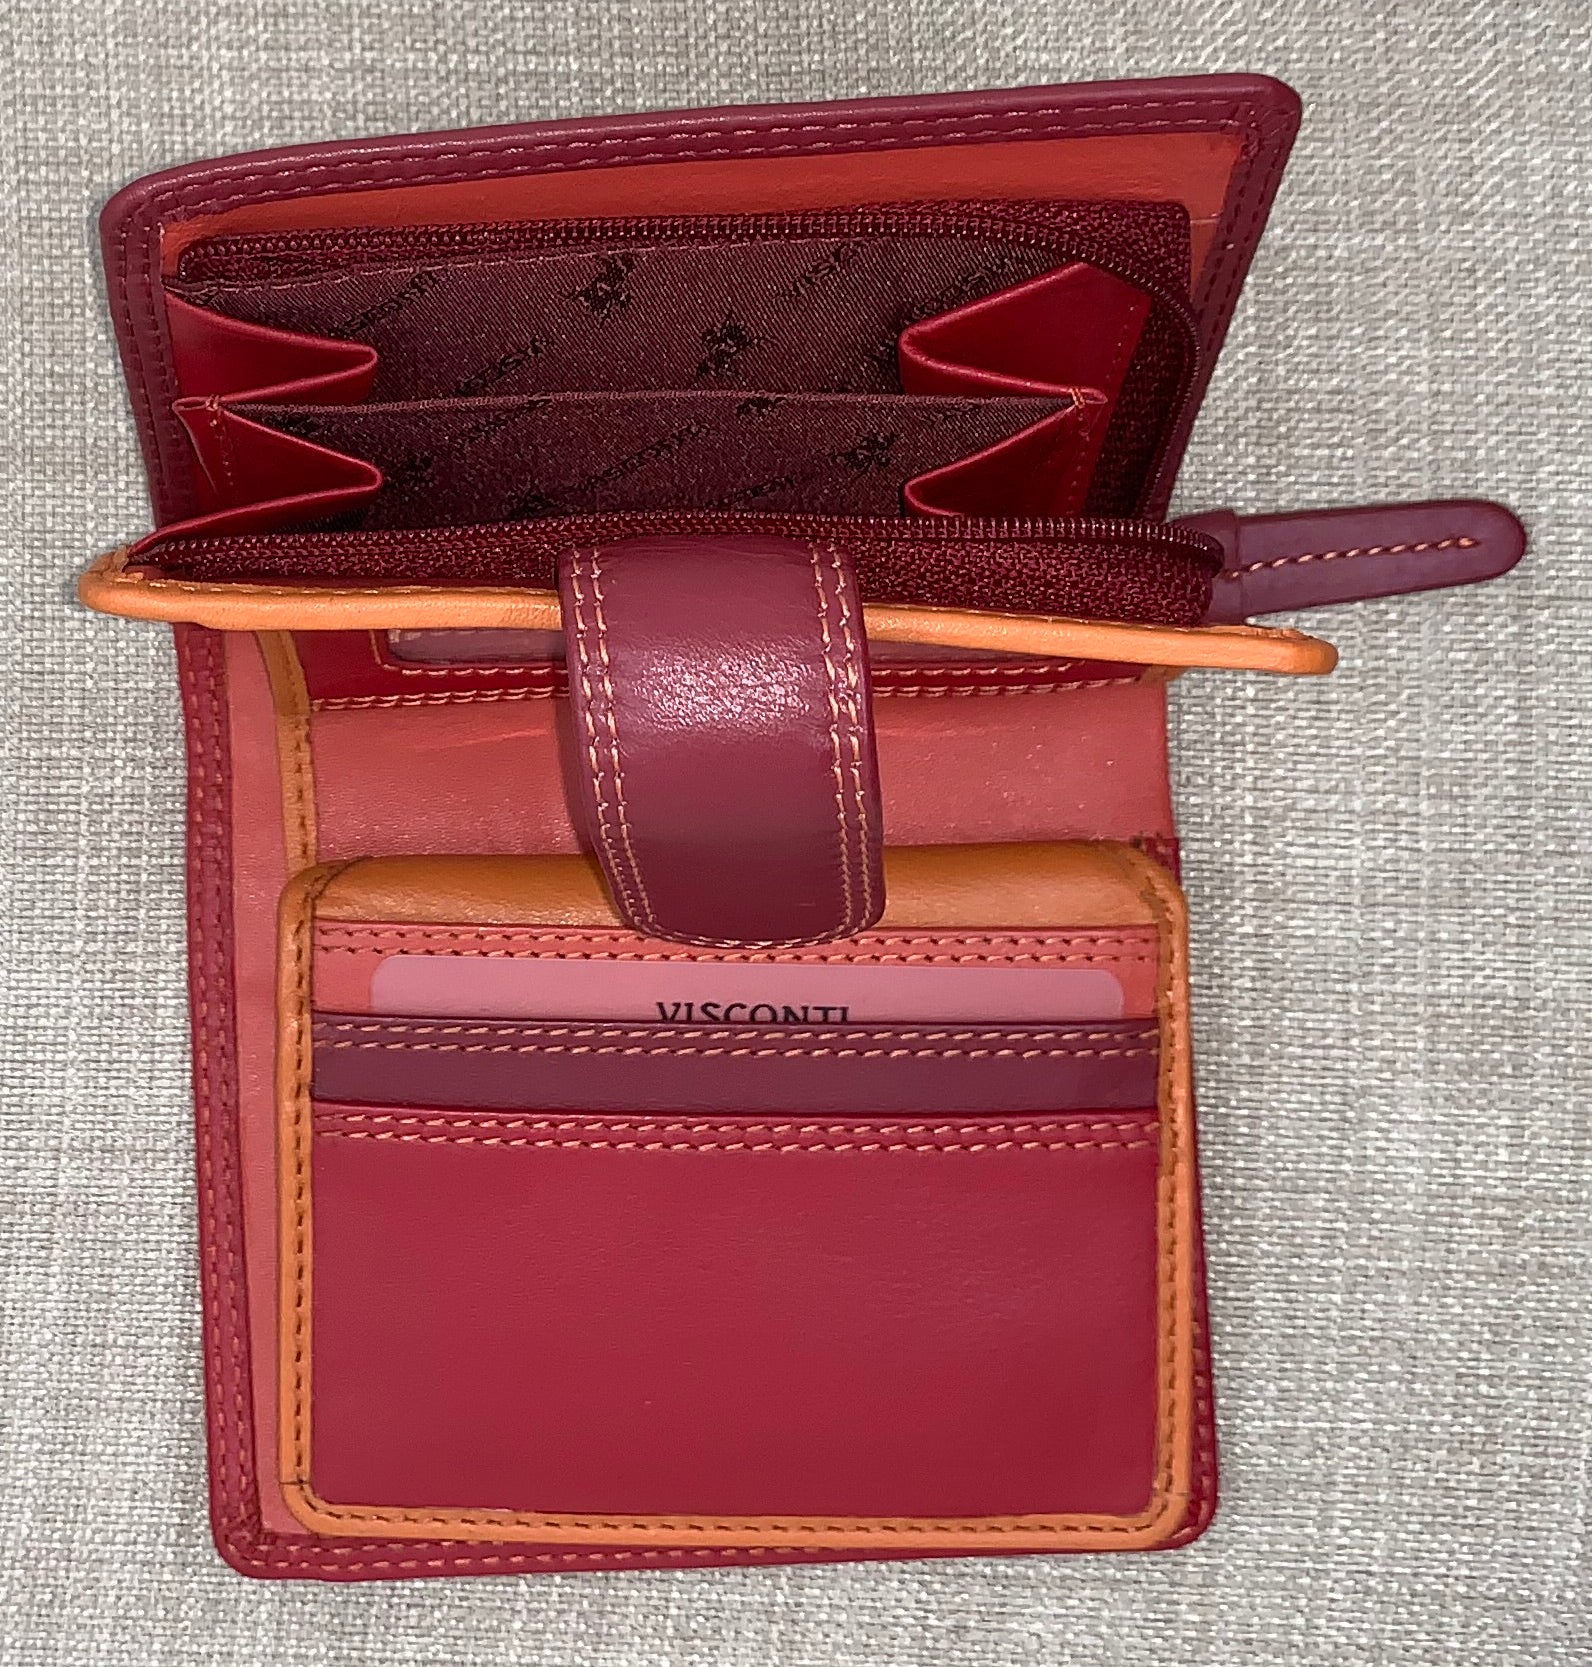 Visconti Bali Ladies Two Tone Red Leather Purse